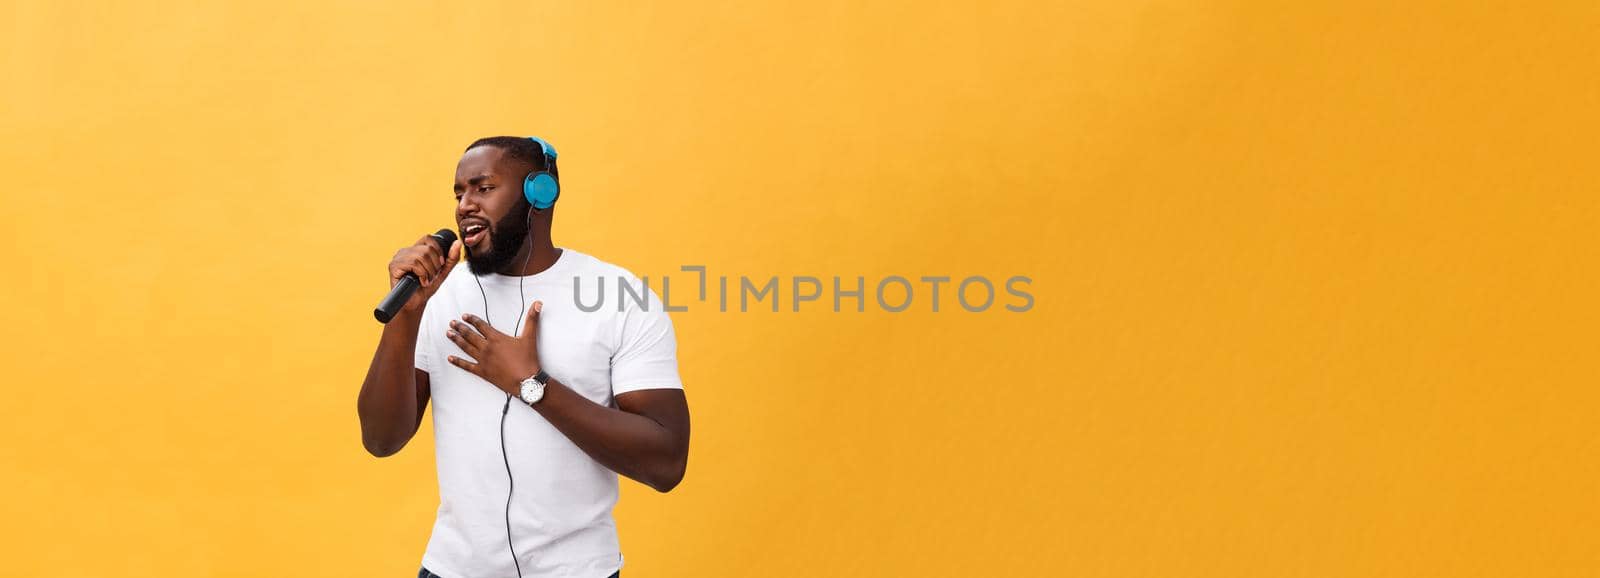 Portrait of cheerful positive chic. handsome african man holding microphone and having headphones on head listening music singing song enjoying weekend vacation isolated on yellow background.